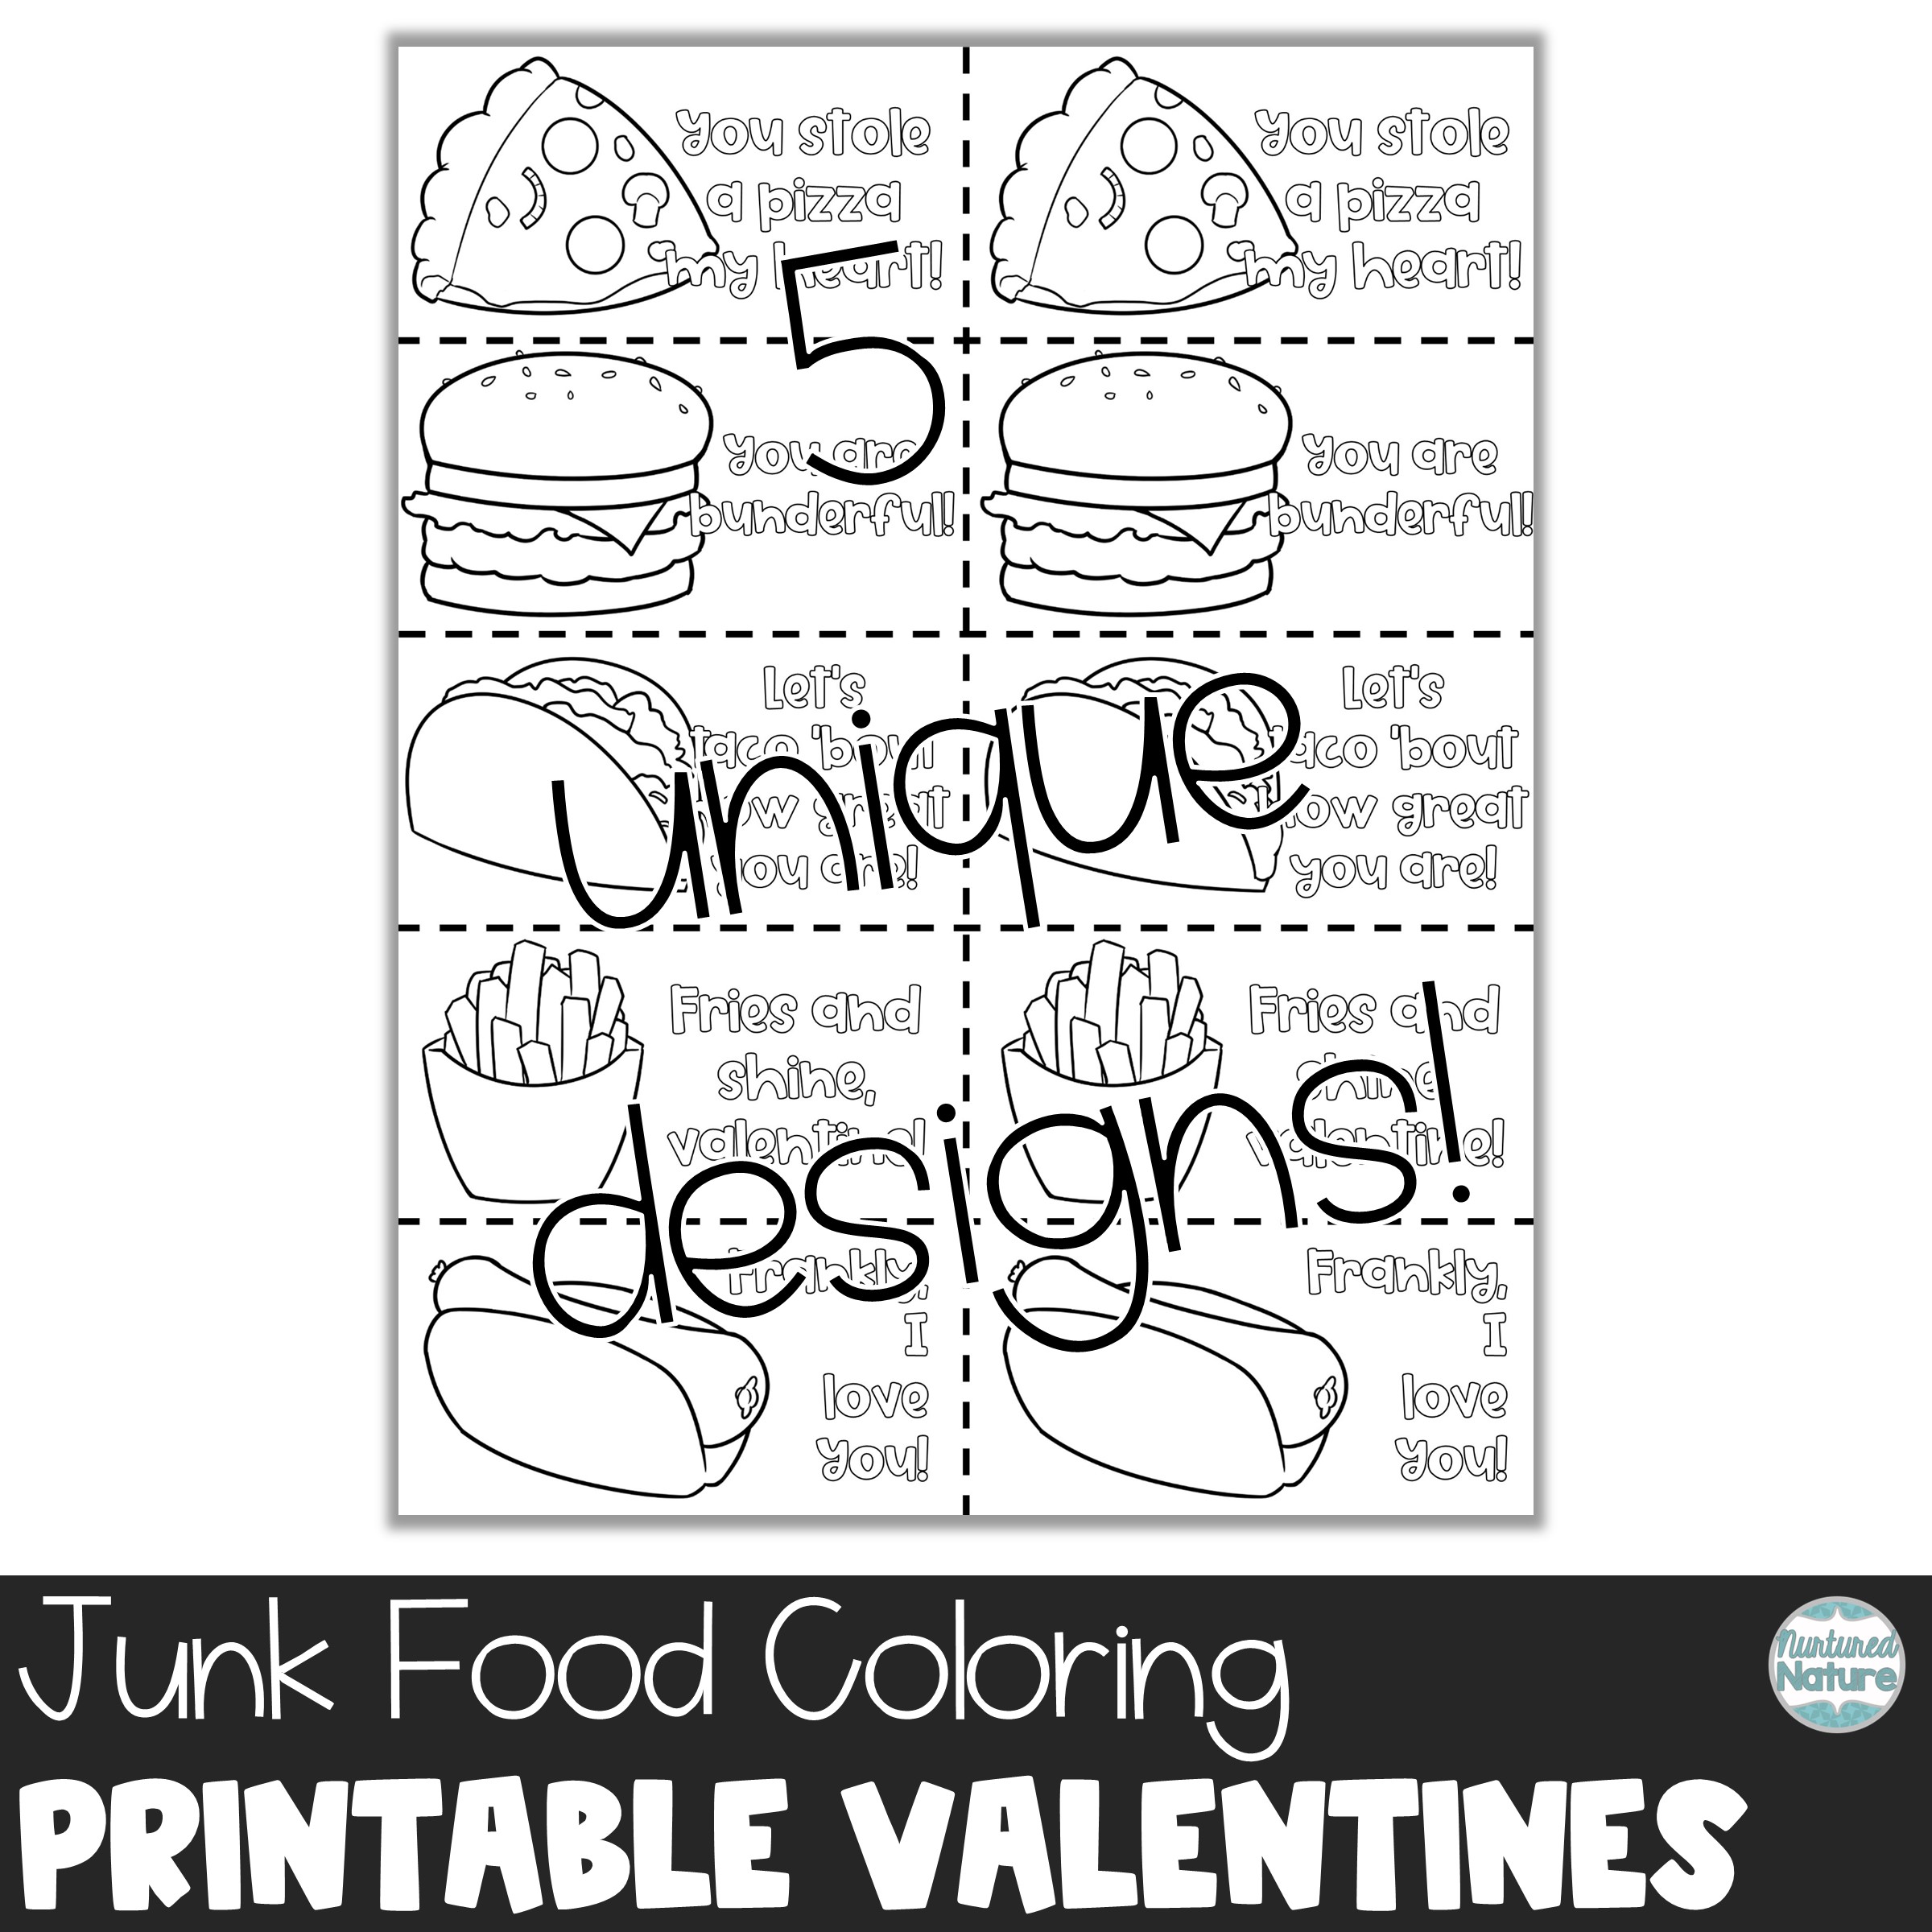 Junk food coloring valentines day cards printable made by teachers